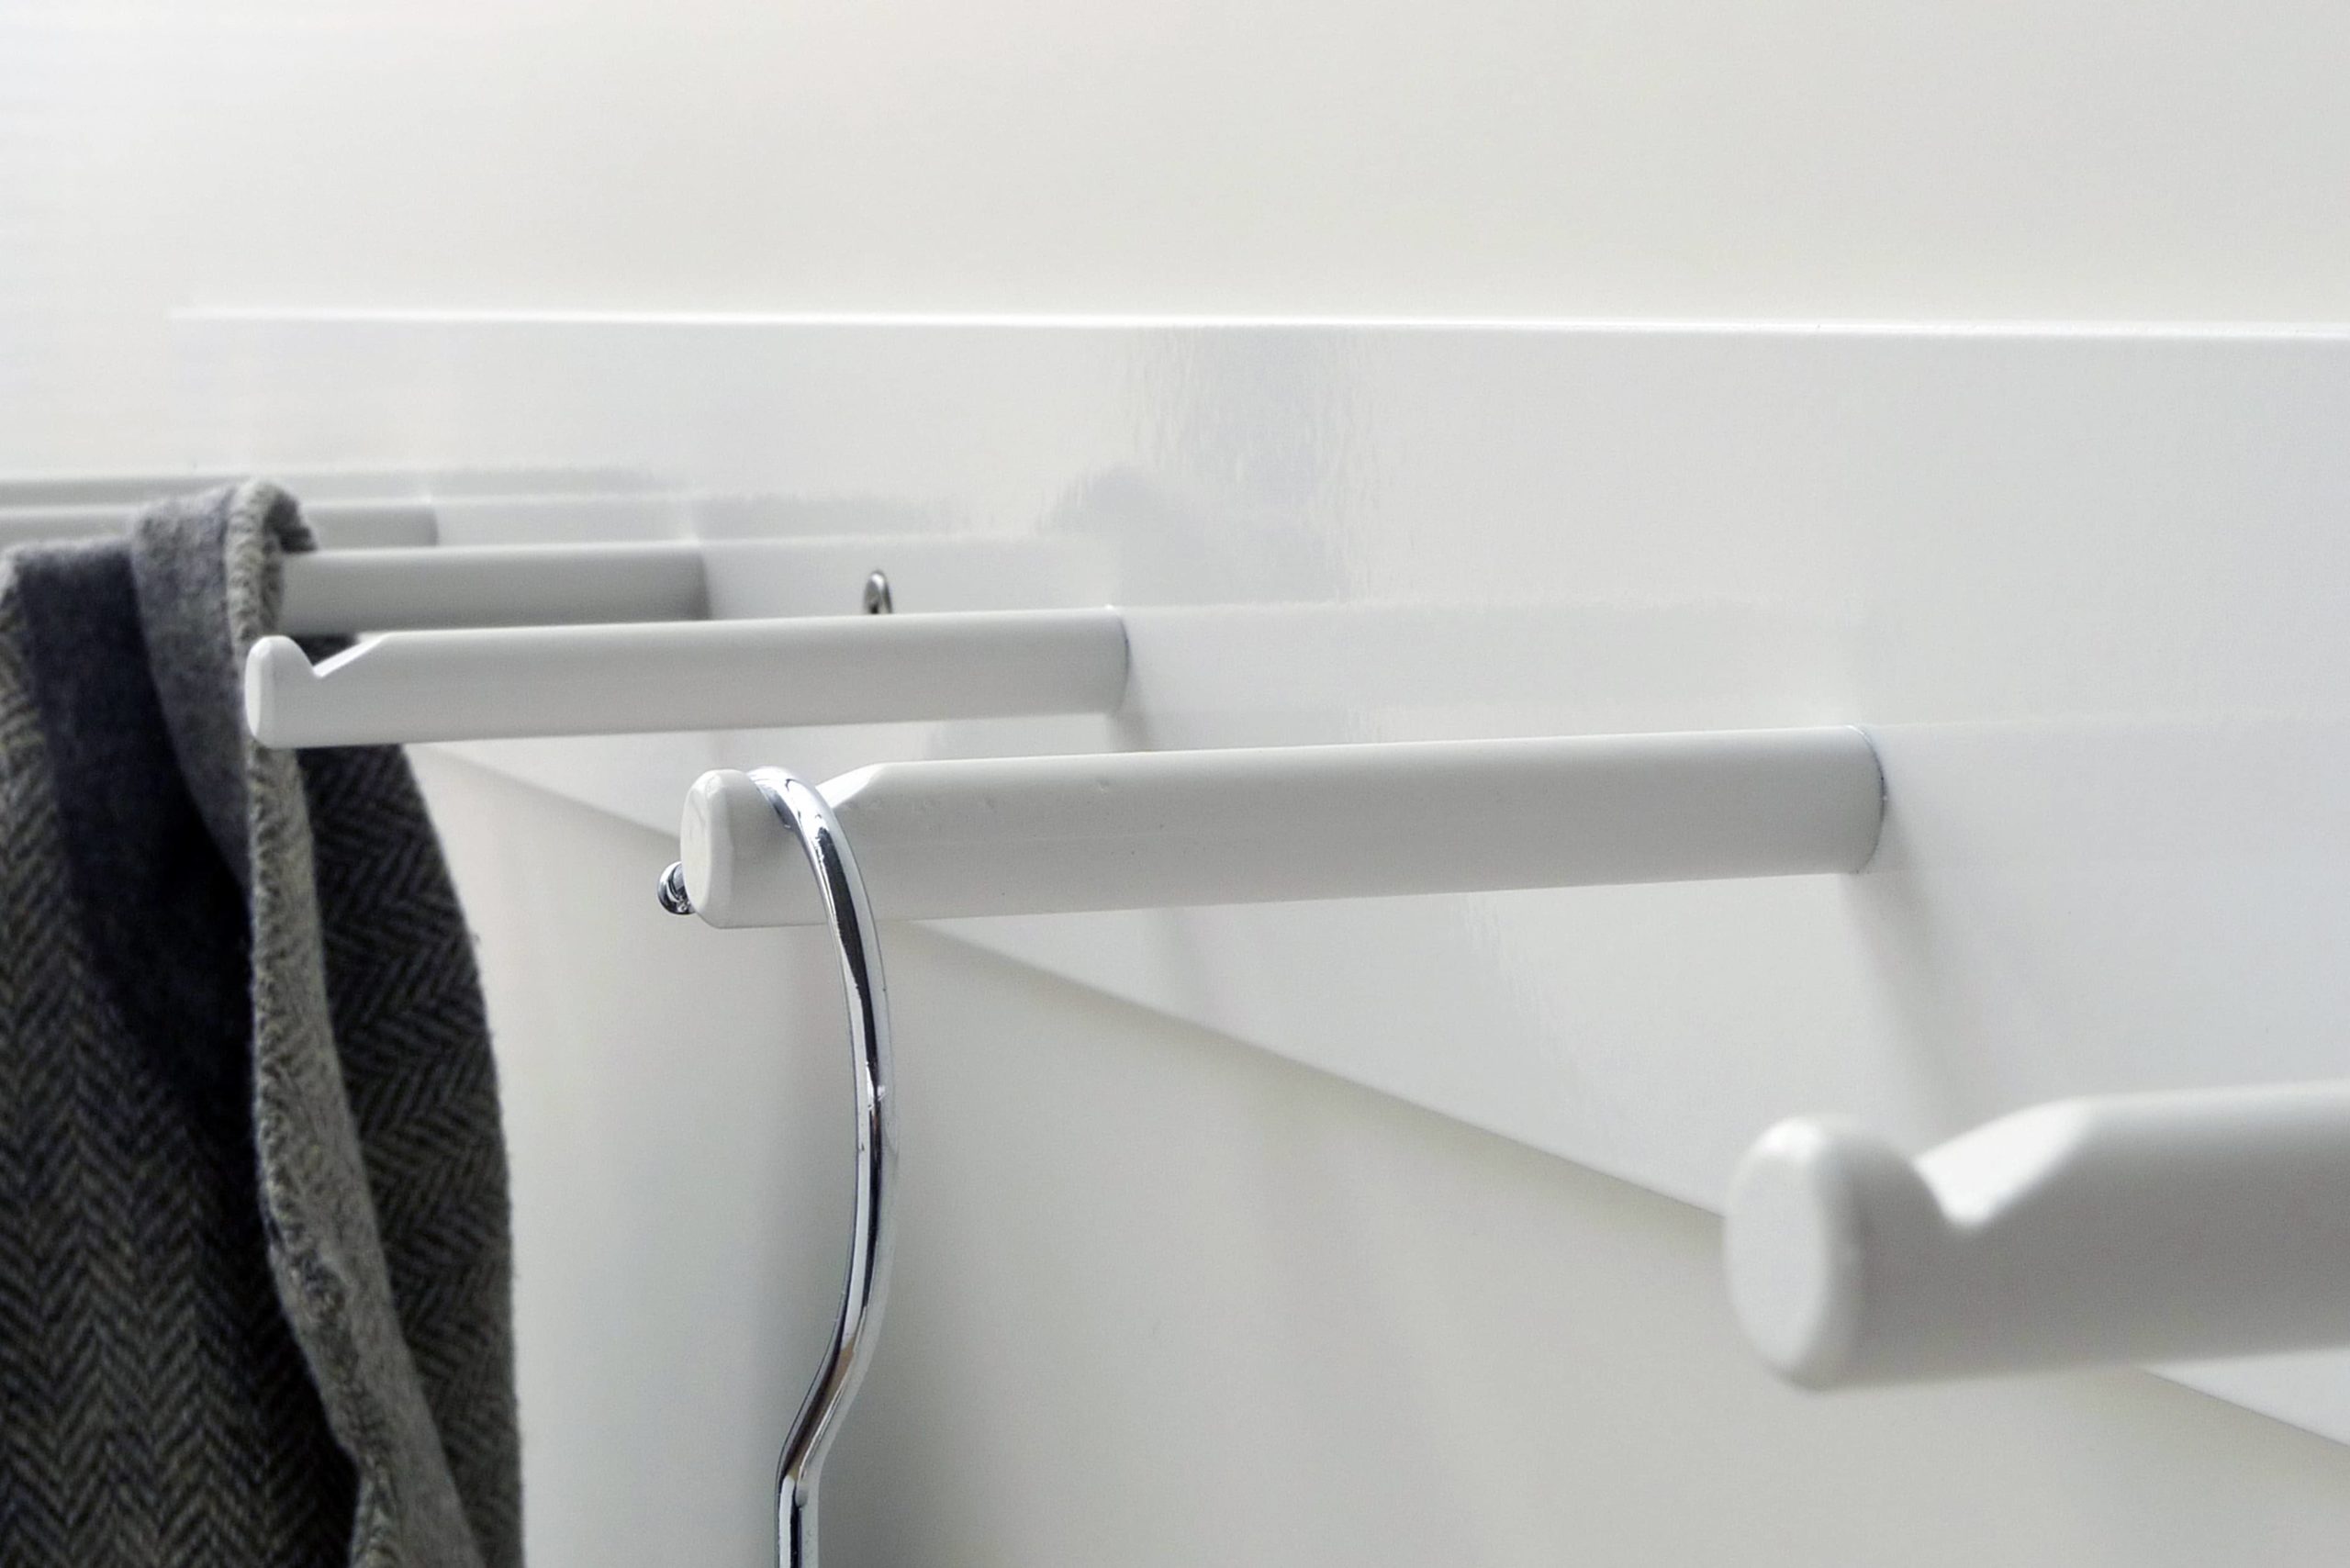 Hellogoodbye coat rack is made of a flat piece of steel white powder coated plus six round hooks with notches to prevent clothes or coat hangers from sliding off.